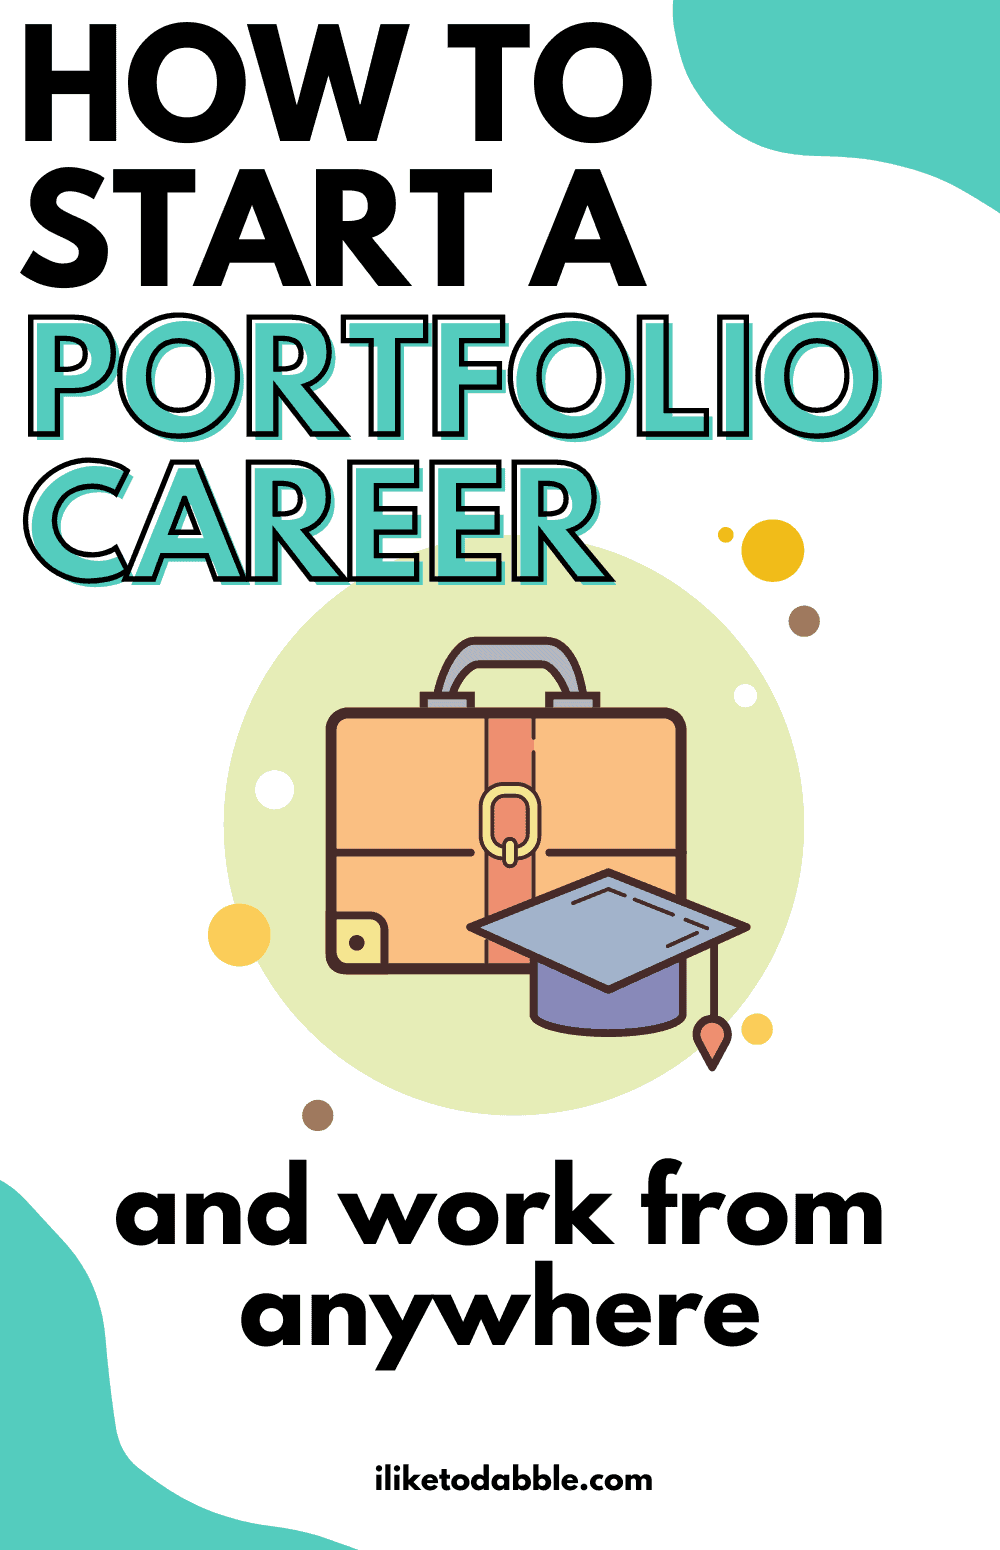 pinnable image of career icons and design elements with title text overlay that reads: how to start a portfolio career